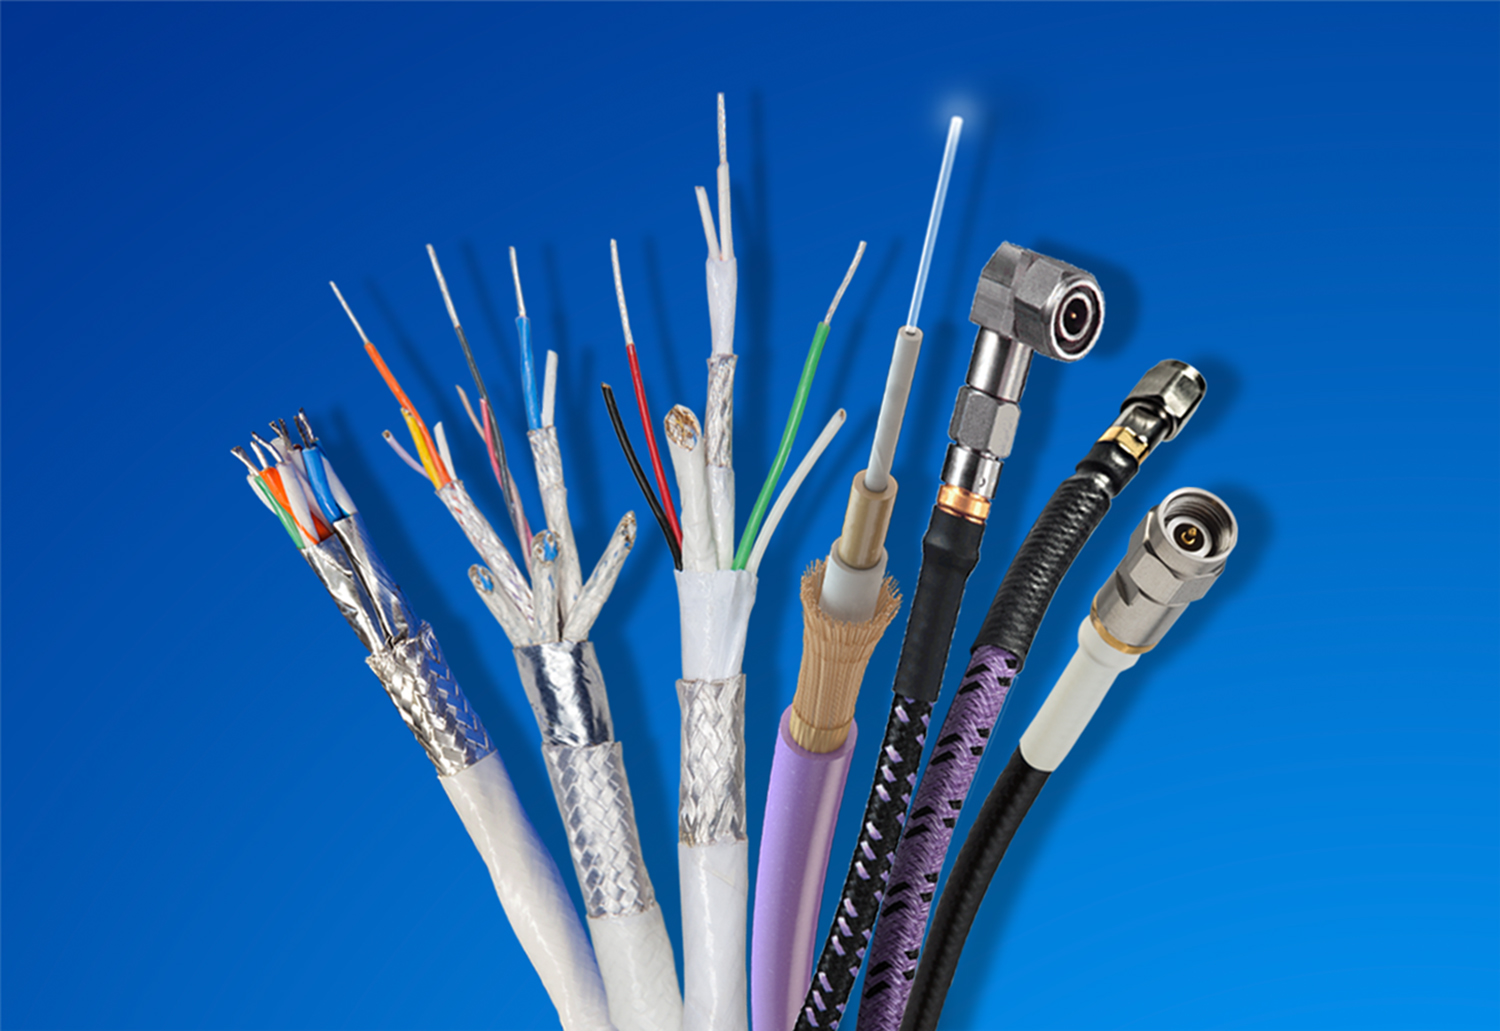 GORE® Aerospace Cables boost protection and performance in modern avionics with compact, flexible and routable designs.